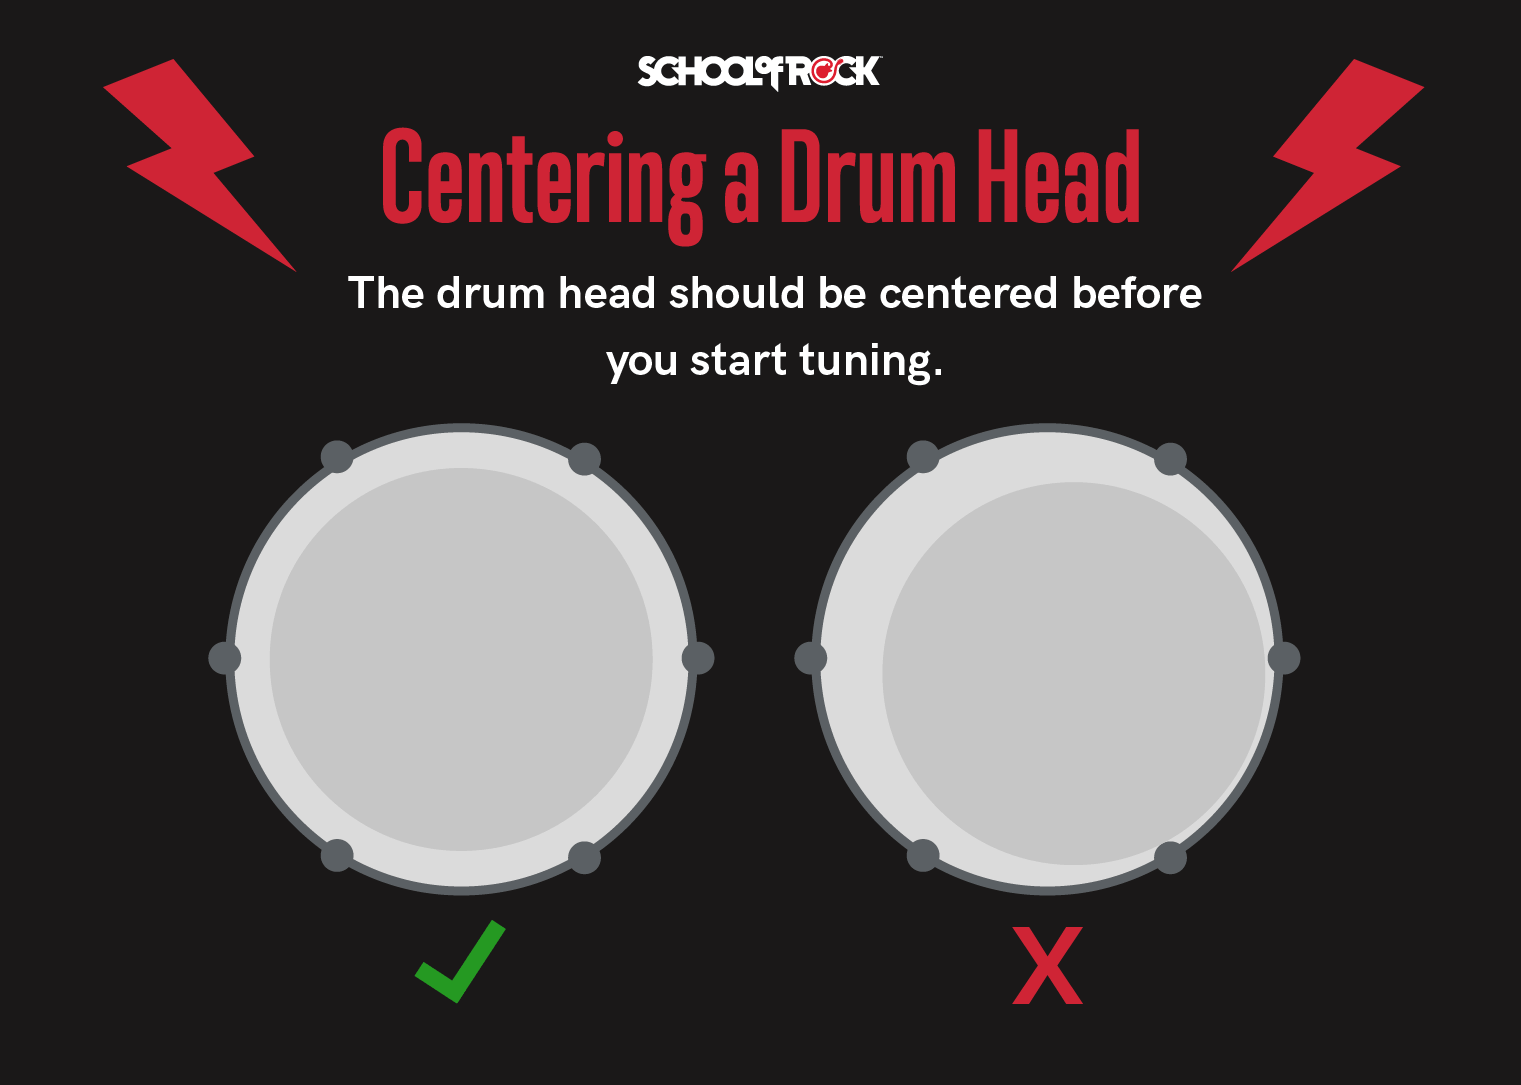 Center your drum head before you start tuning.